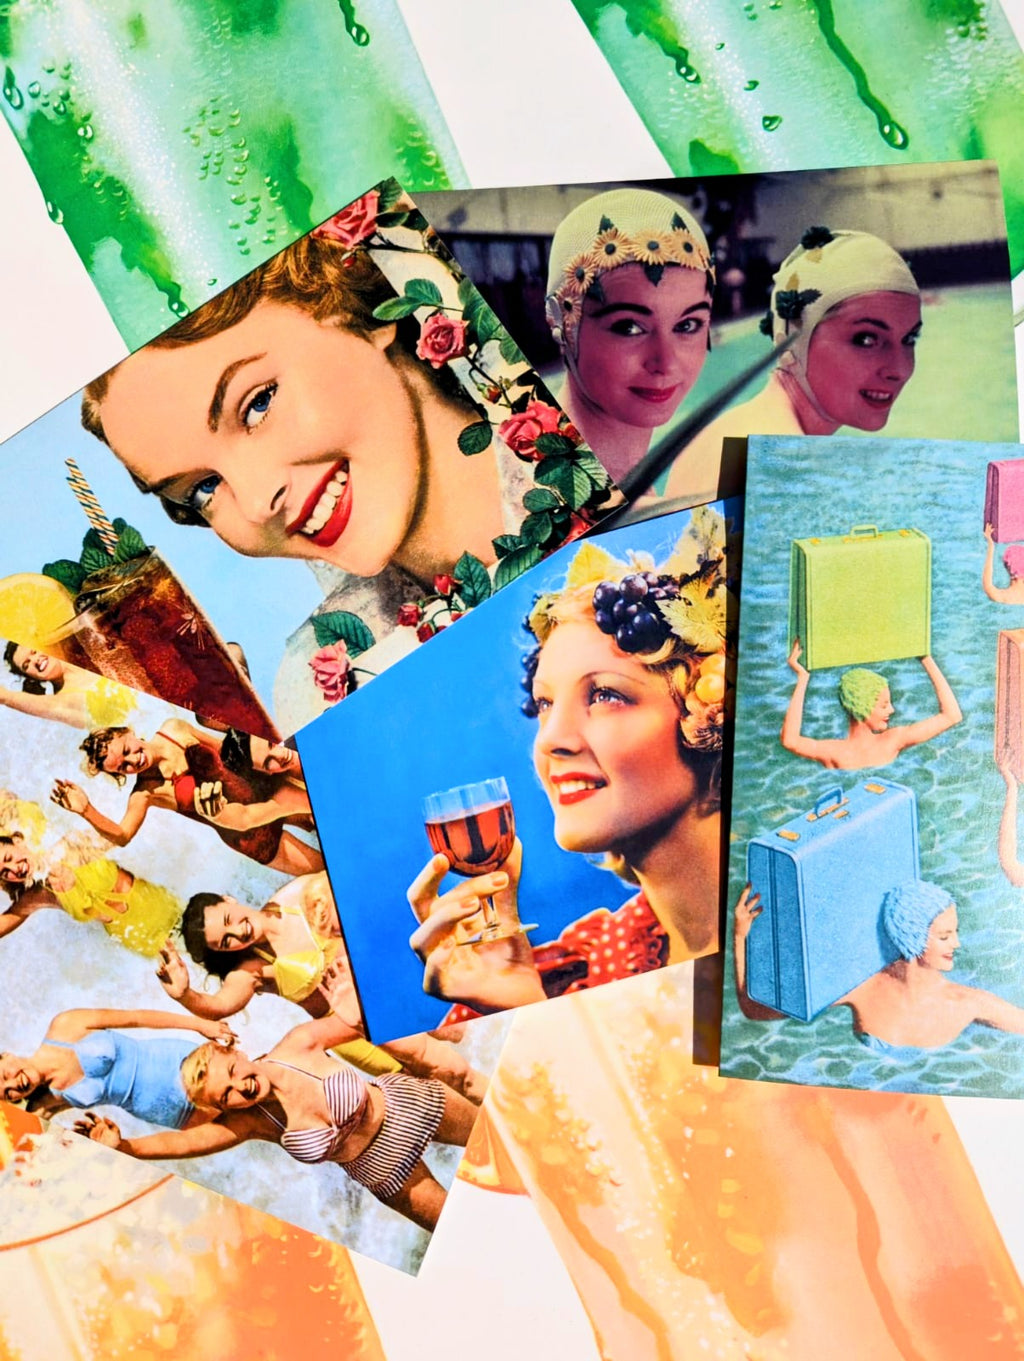 Super summer kitsch classics! Gorgeous ladies doing what they fancy!, cards to bring joy to your swimming and celebrating friends and family!!

Set of 5 cards

17cm x 12cm 